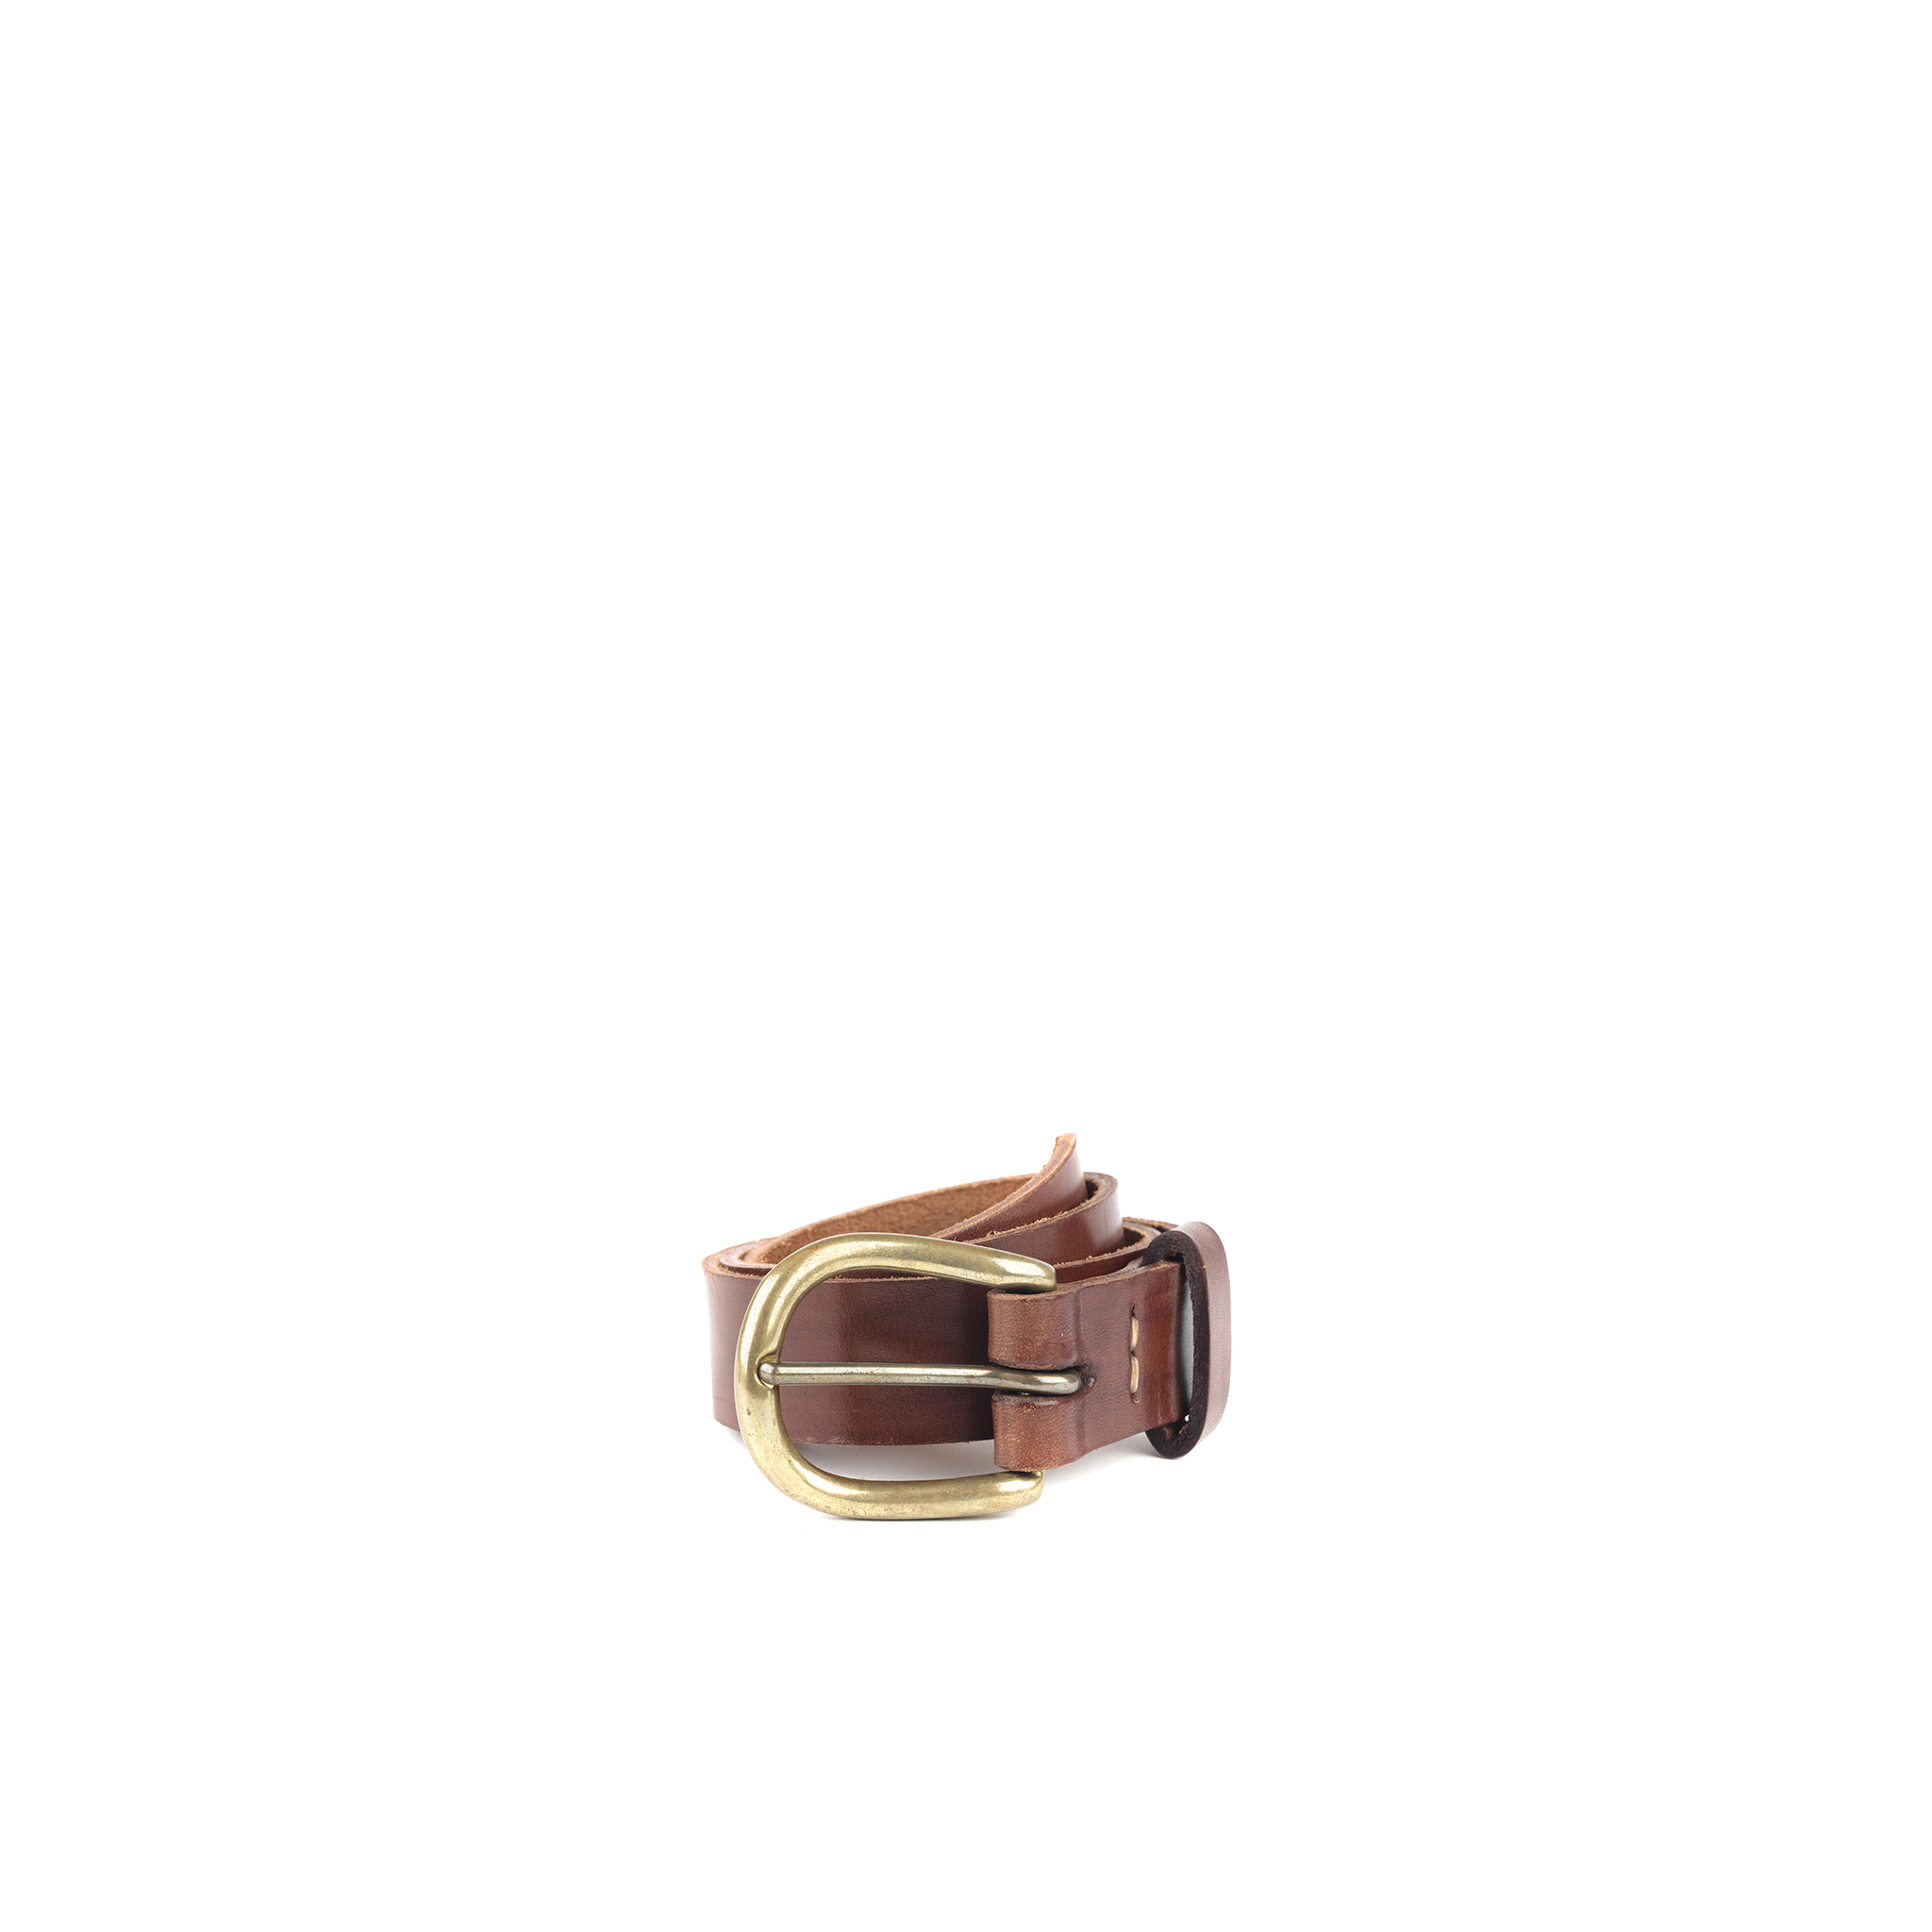 Brass Buckle Belt - Vegetable tanned leather - Brown color